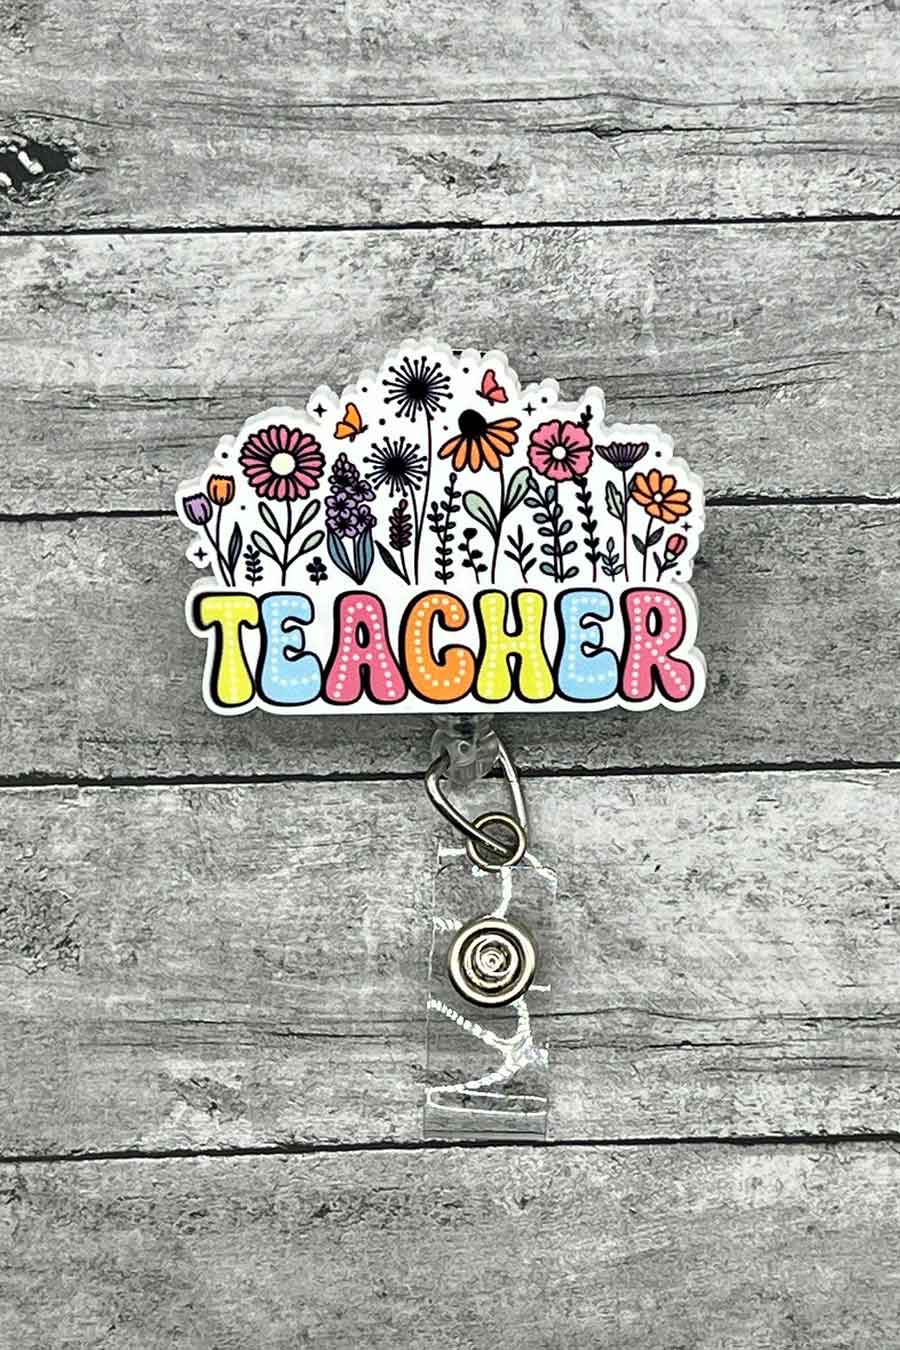 Wildflower Whimsy Teacher Badge Reel featuring a colorful design with various flowers and the word 'TEACHER' in playful, multi-colored letters.